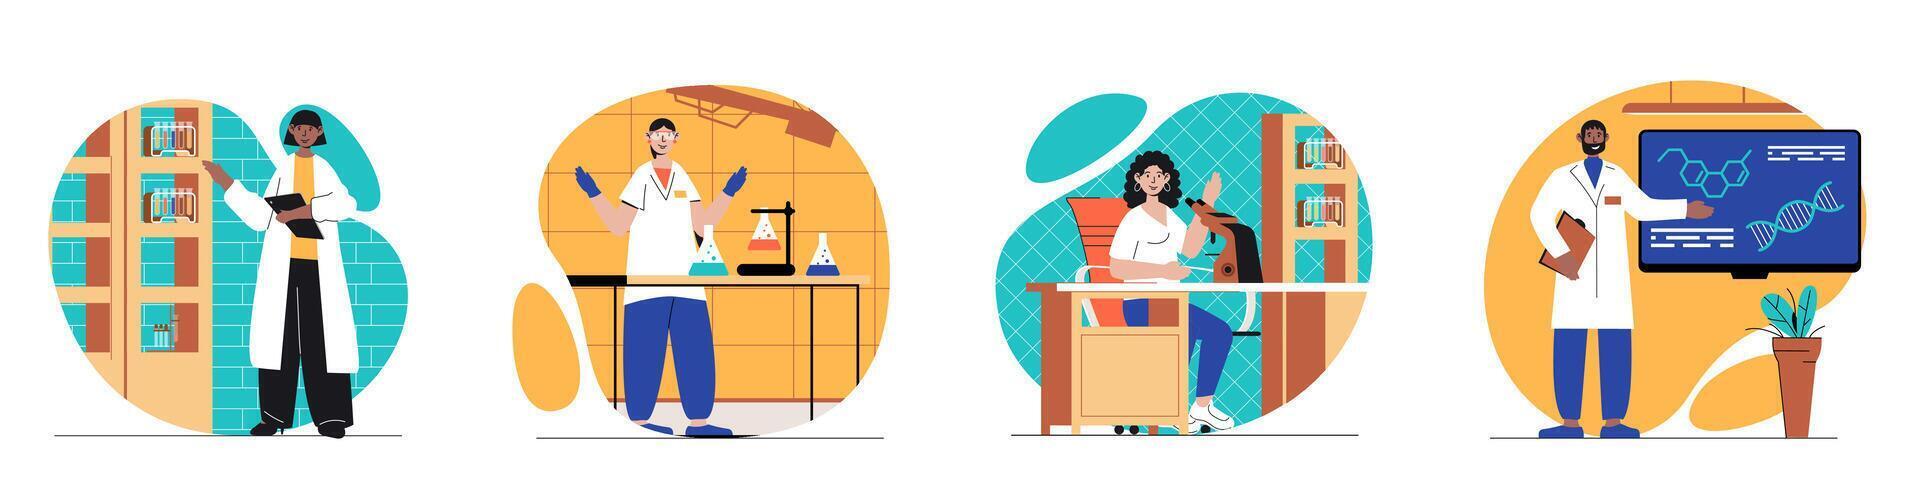 Laboratory concept with people scenes set in flat web design. Bundle of character situations with scientists experimenting and making scientific tests or medical analysis in lab. Vector illustrations.